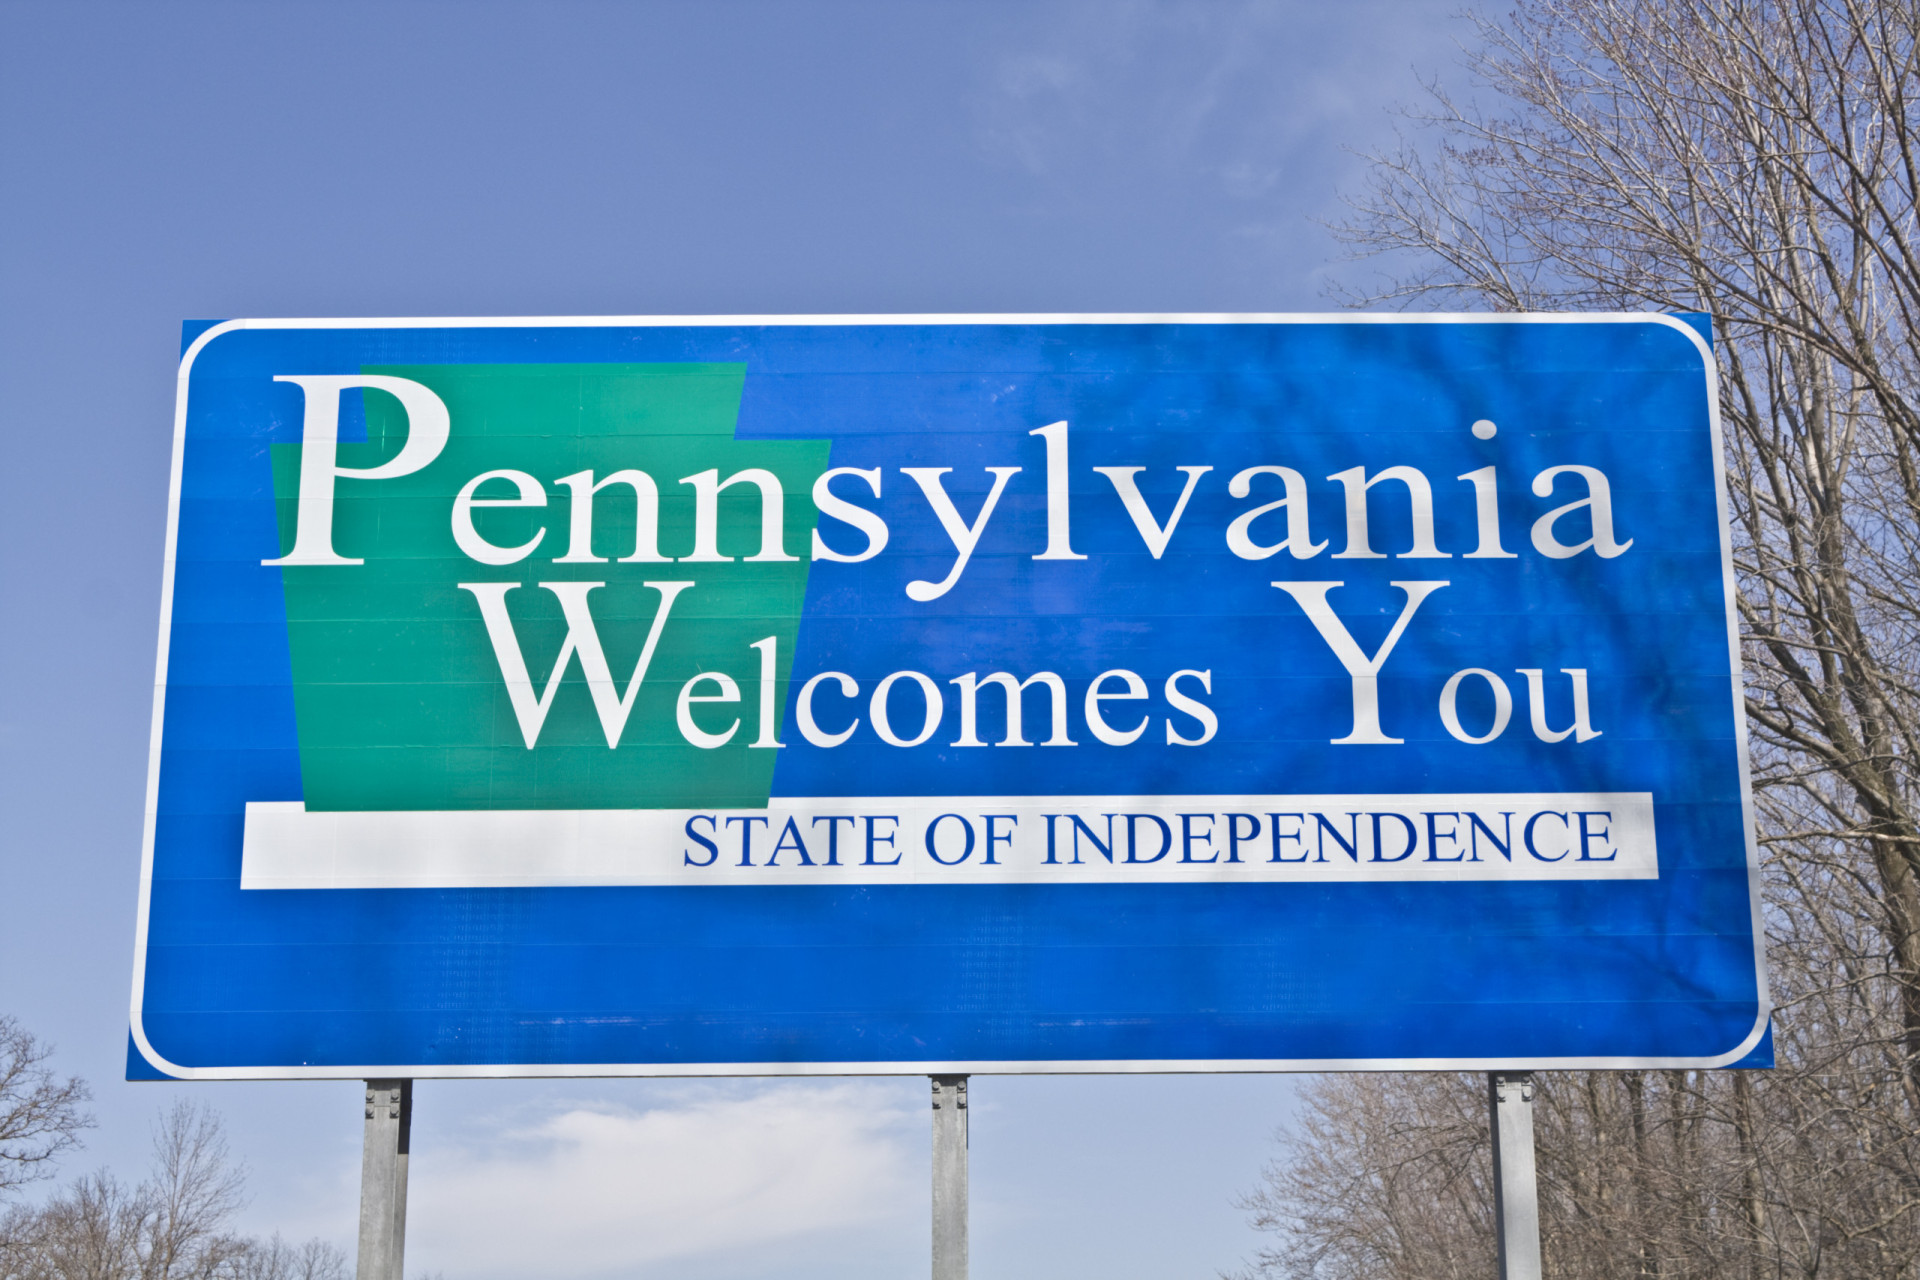 <p>The slogan on the state's welcome sign was added in 2004. It's a reminder of Pennsylvania's importance in American history, including the signing of the Declaration of Independence in 1776.</p>